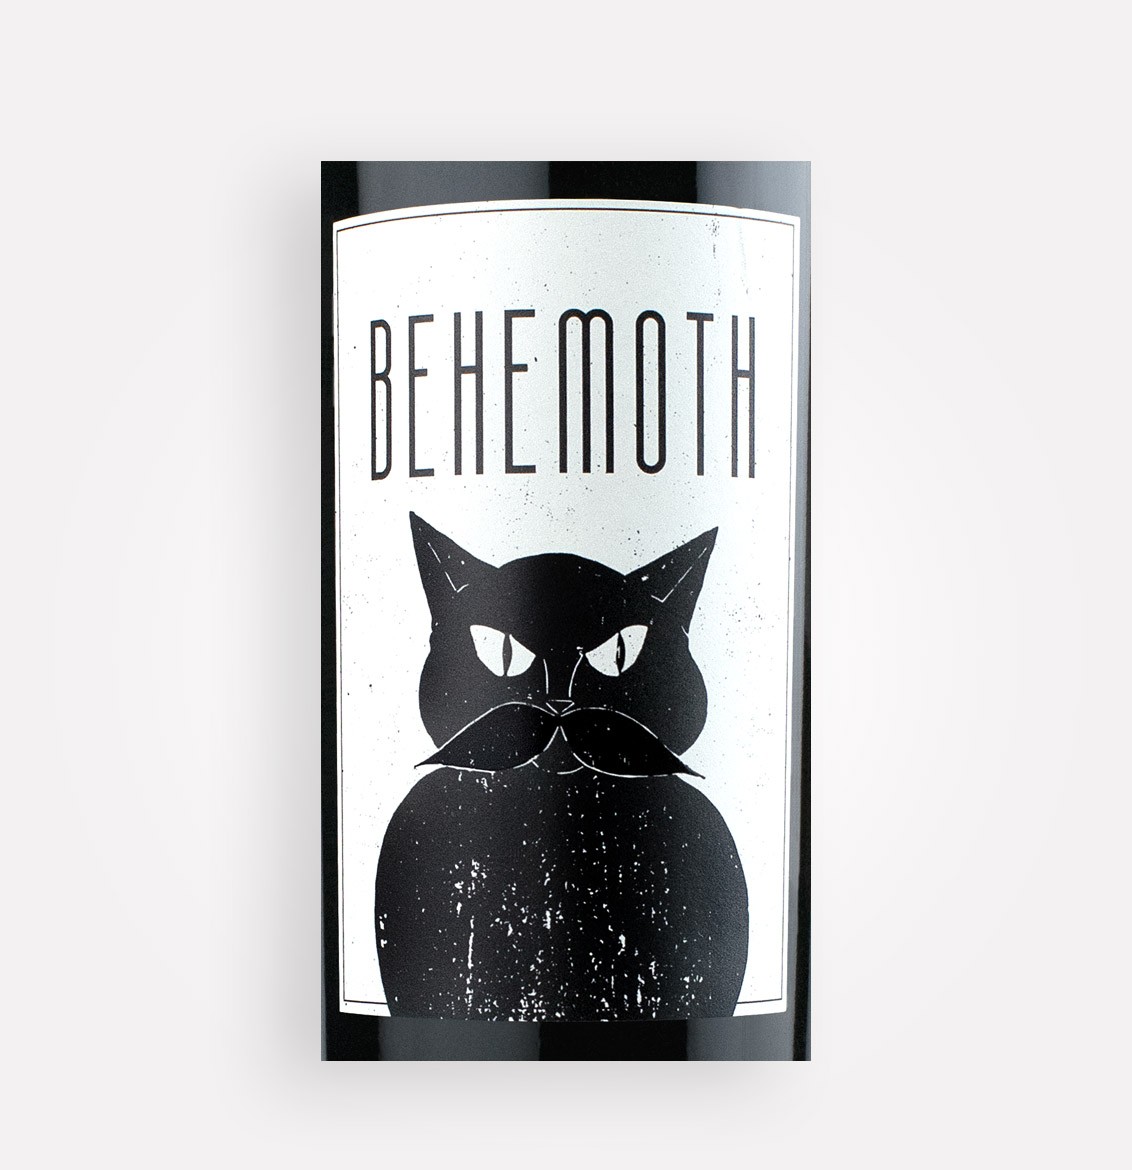 Front label close-up of Wautoma Springs 2017 The Behemoth Reserve Cabernet Sauvignon wine from Washington's Columbia Valley